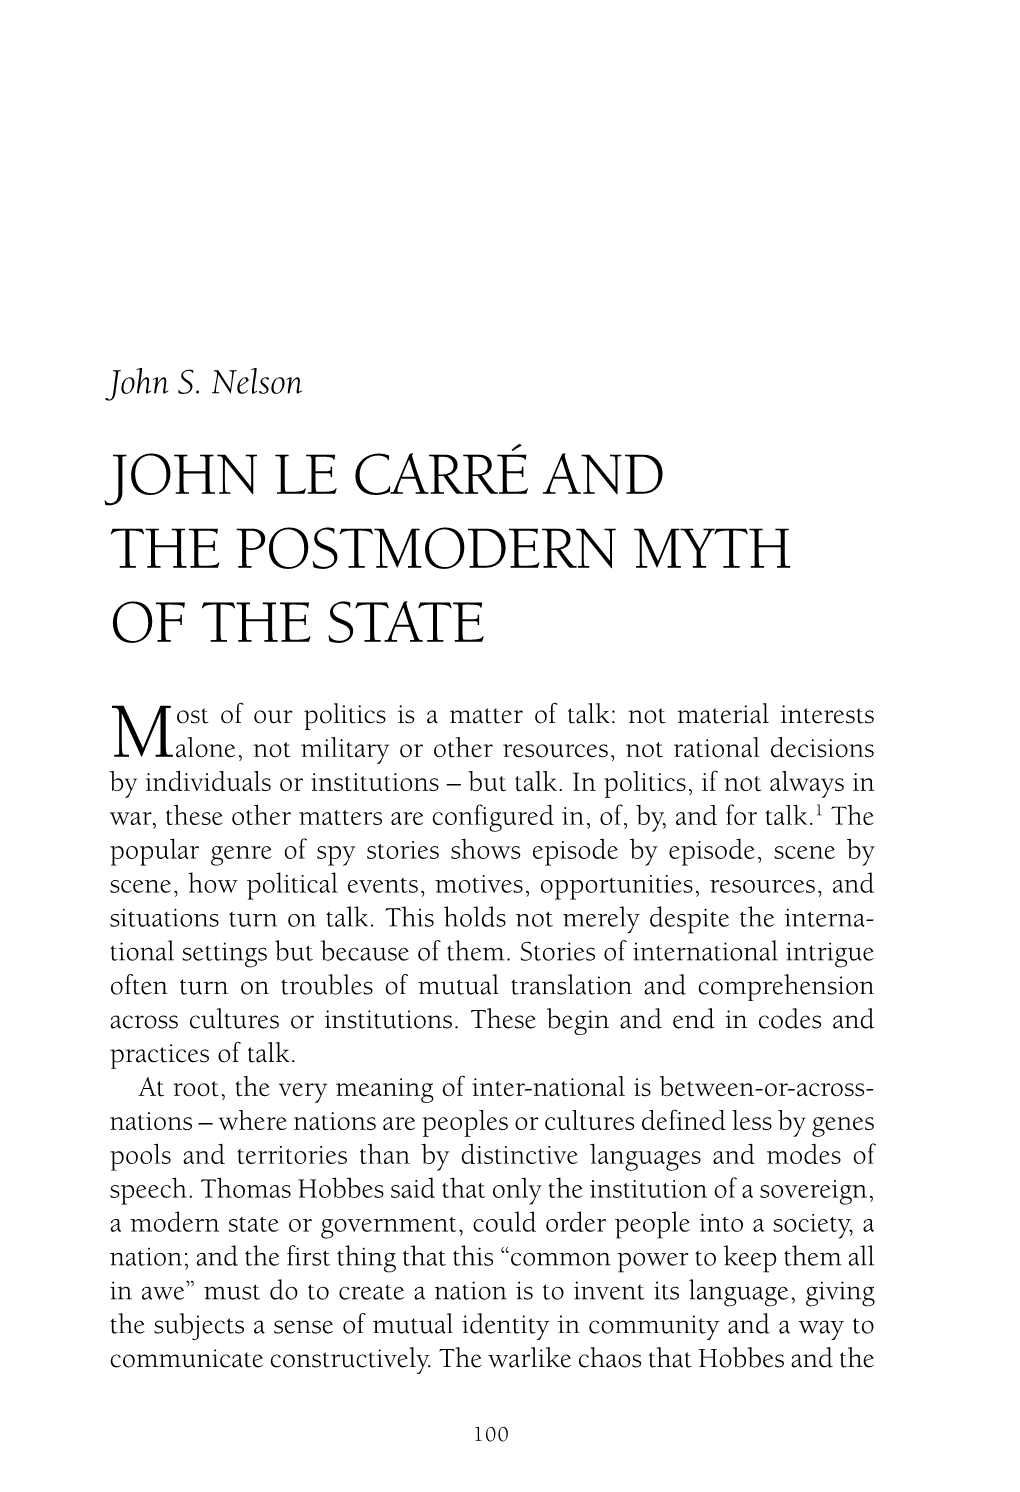 John Le Carré and the Postmodern Myth of the State